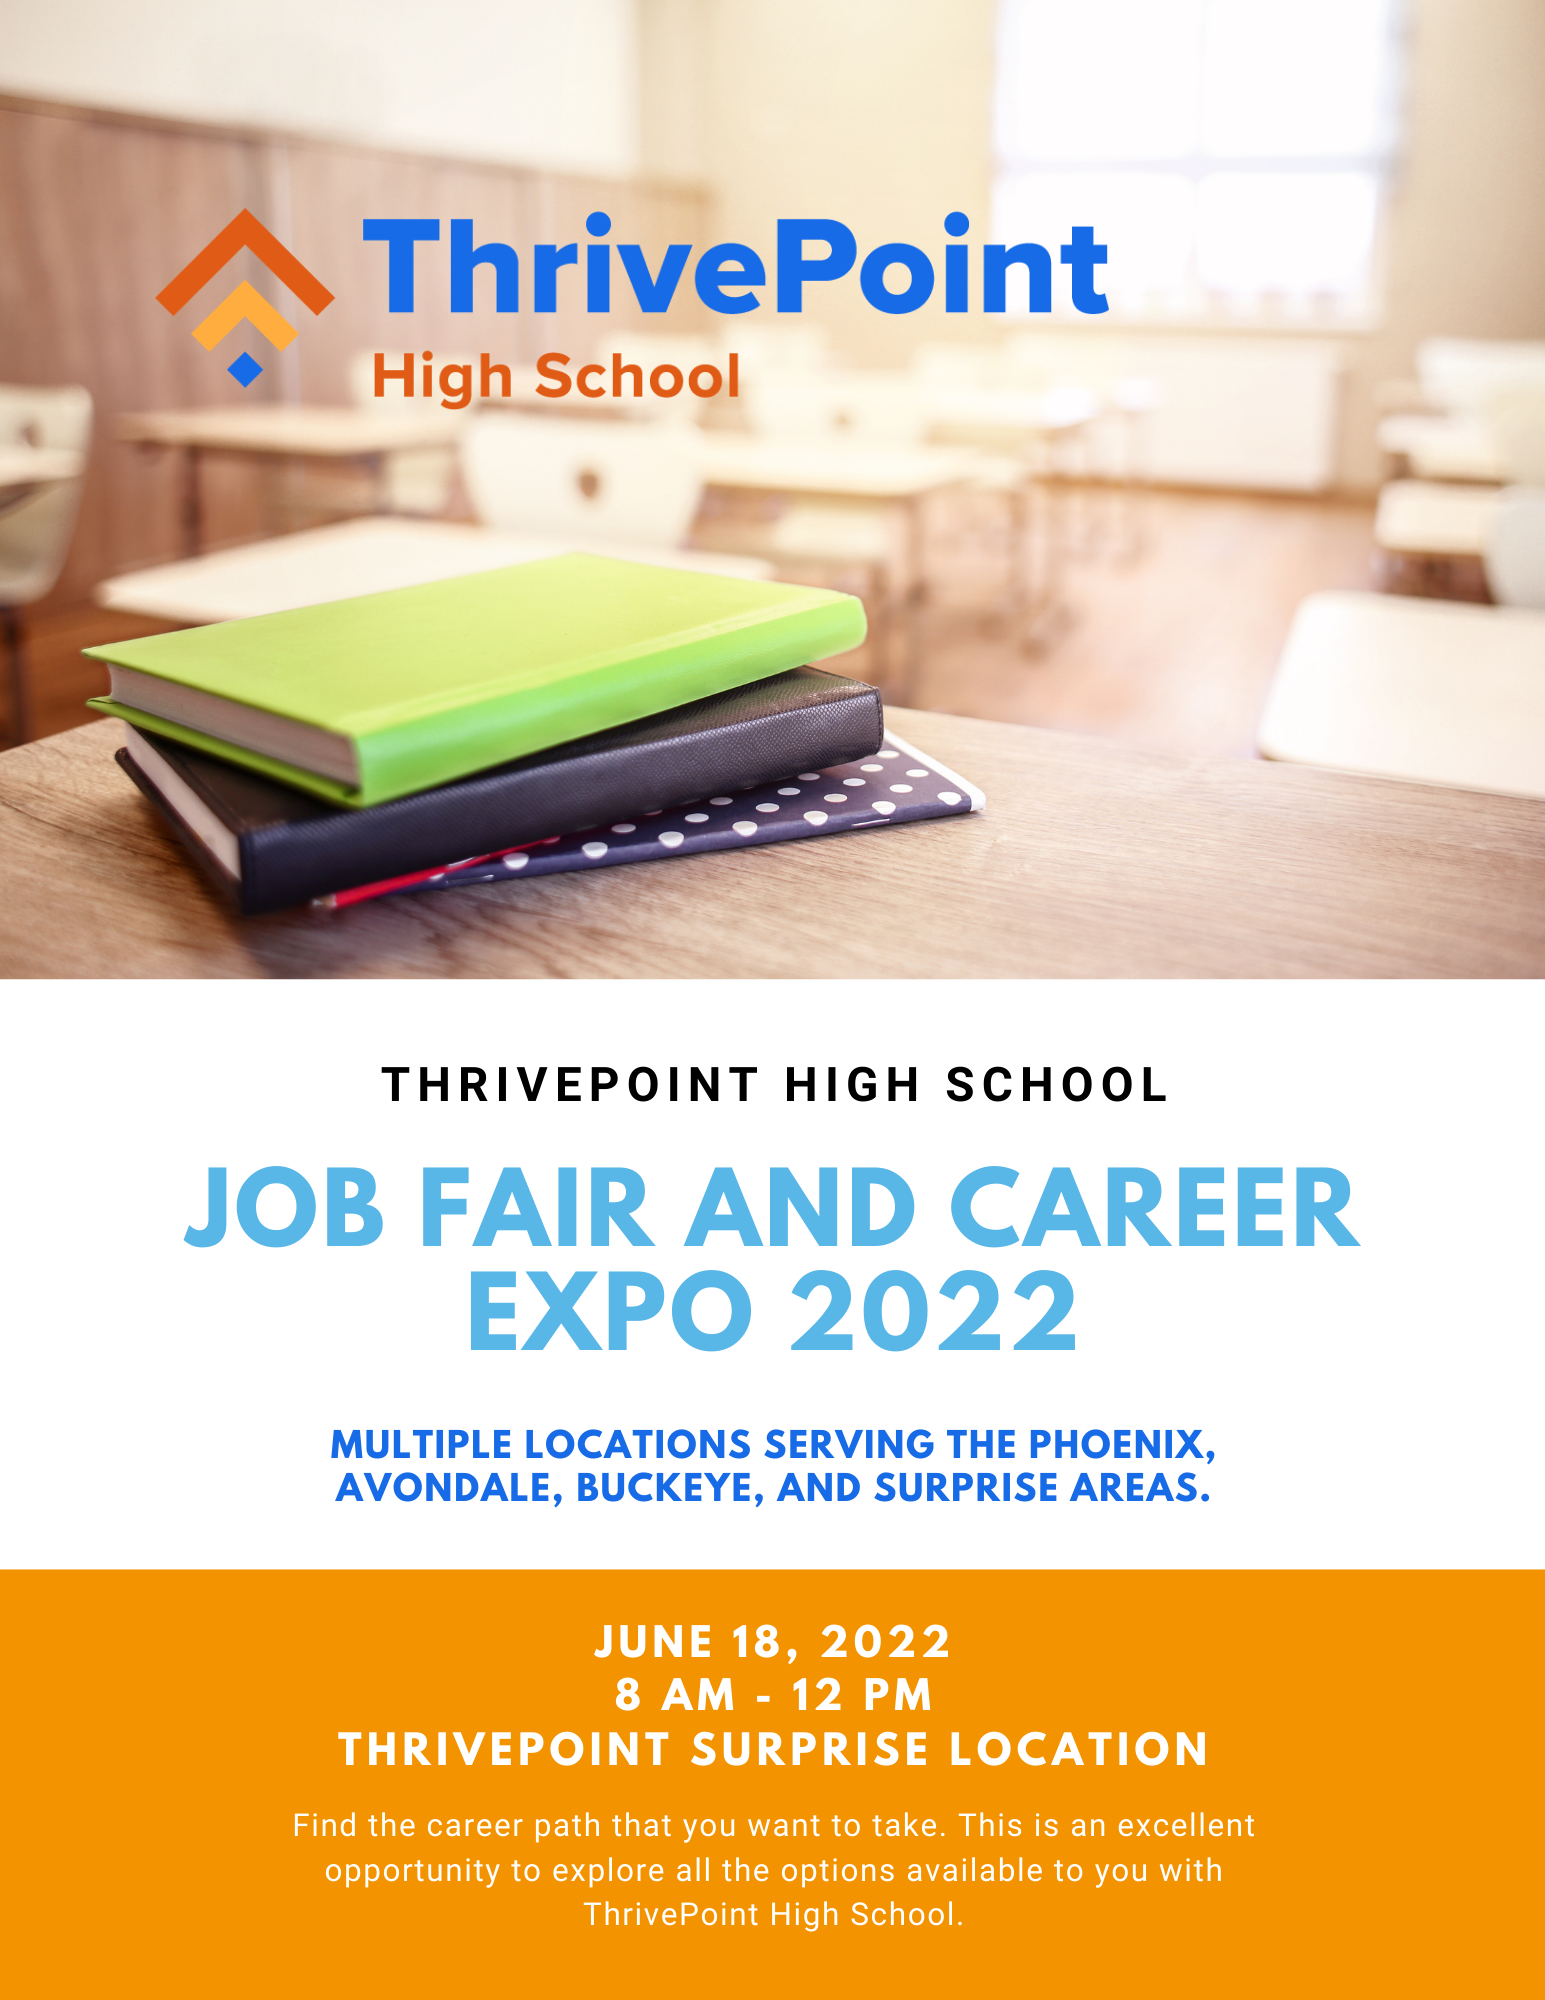 Education Job Fair and Career Expo 2022 ABNewswire